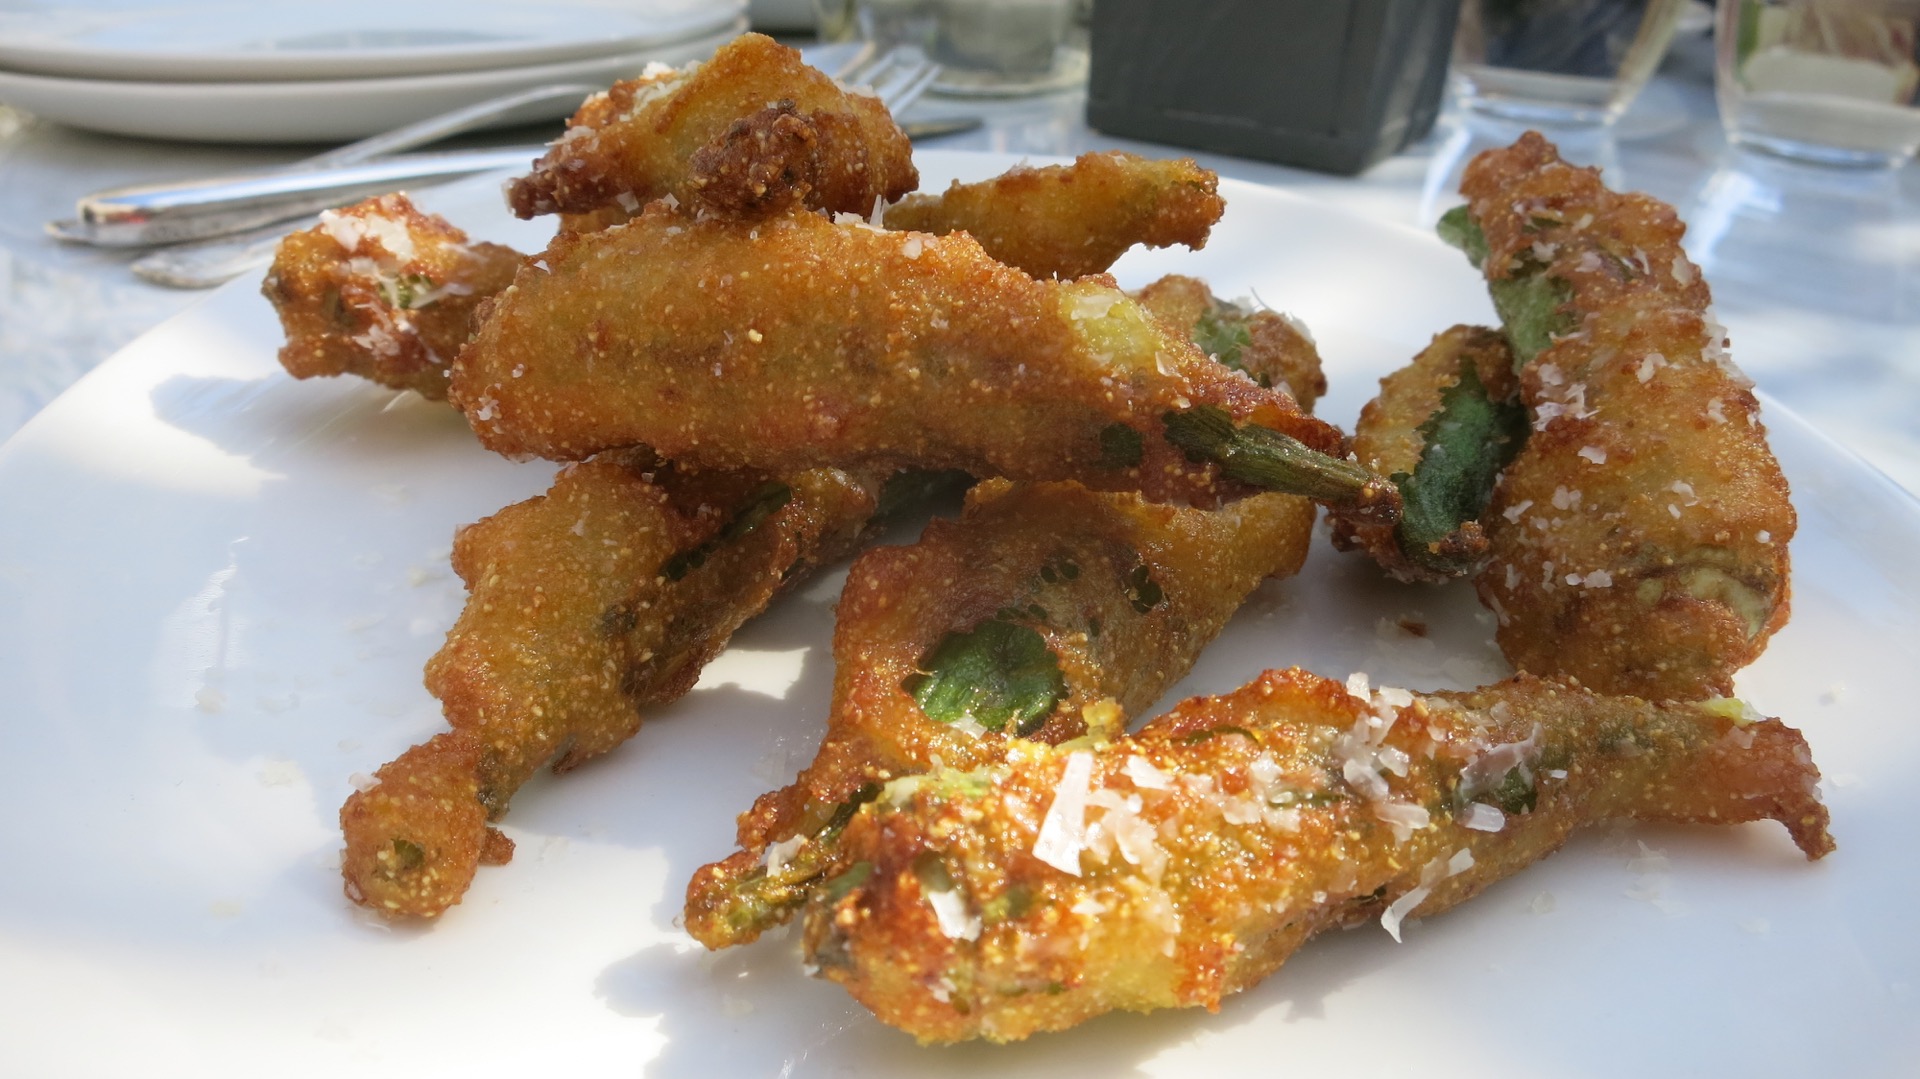 Fried okra with parmesan and Green Goddess dressing. ($7)